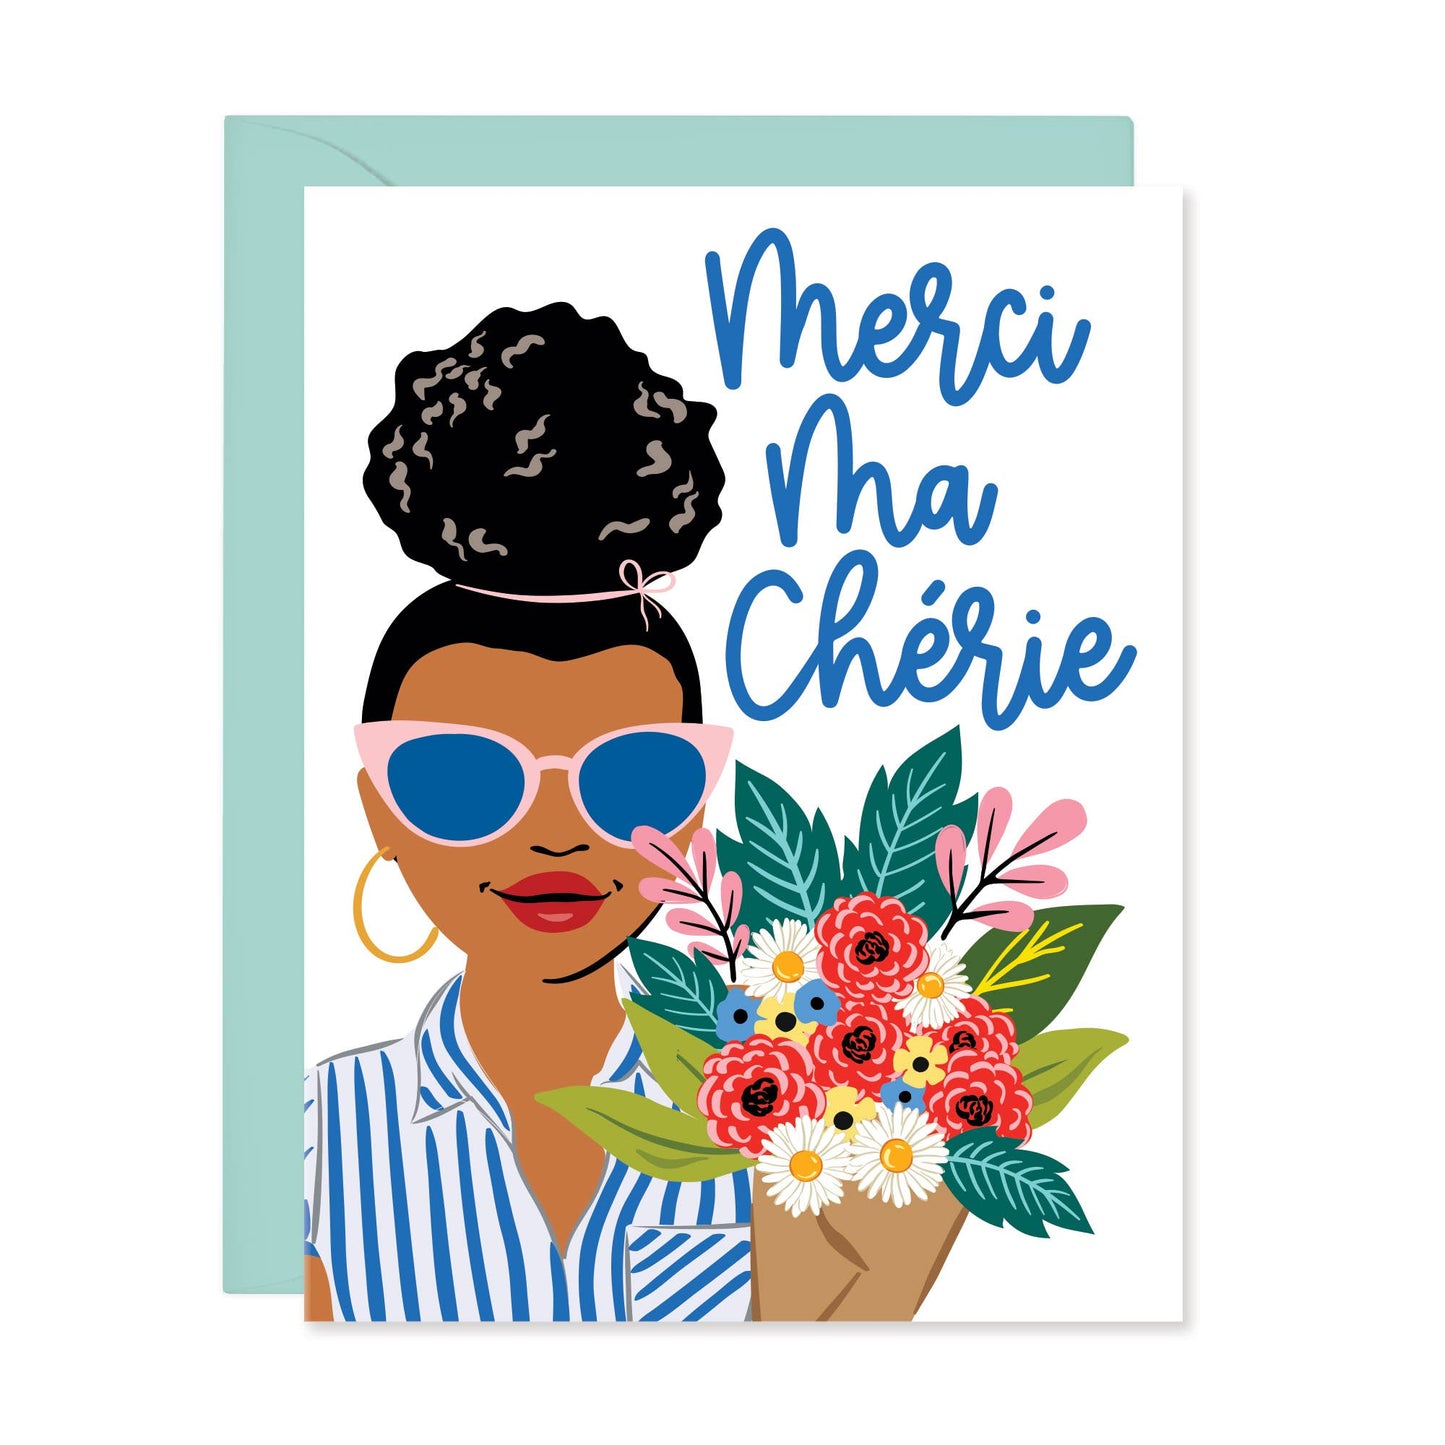 "Merci ma cherie" blue script accompanied by an artistic drawing of a stylish black woman wearing a blue and white top, pink shades, and holding a bunch of flowers.